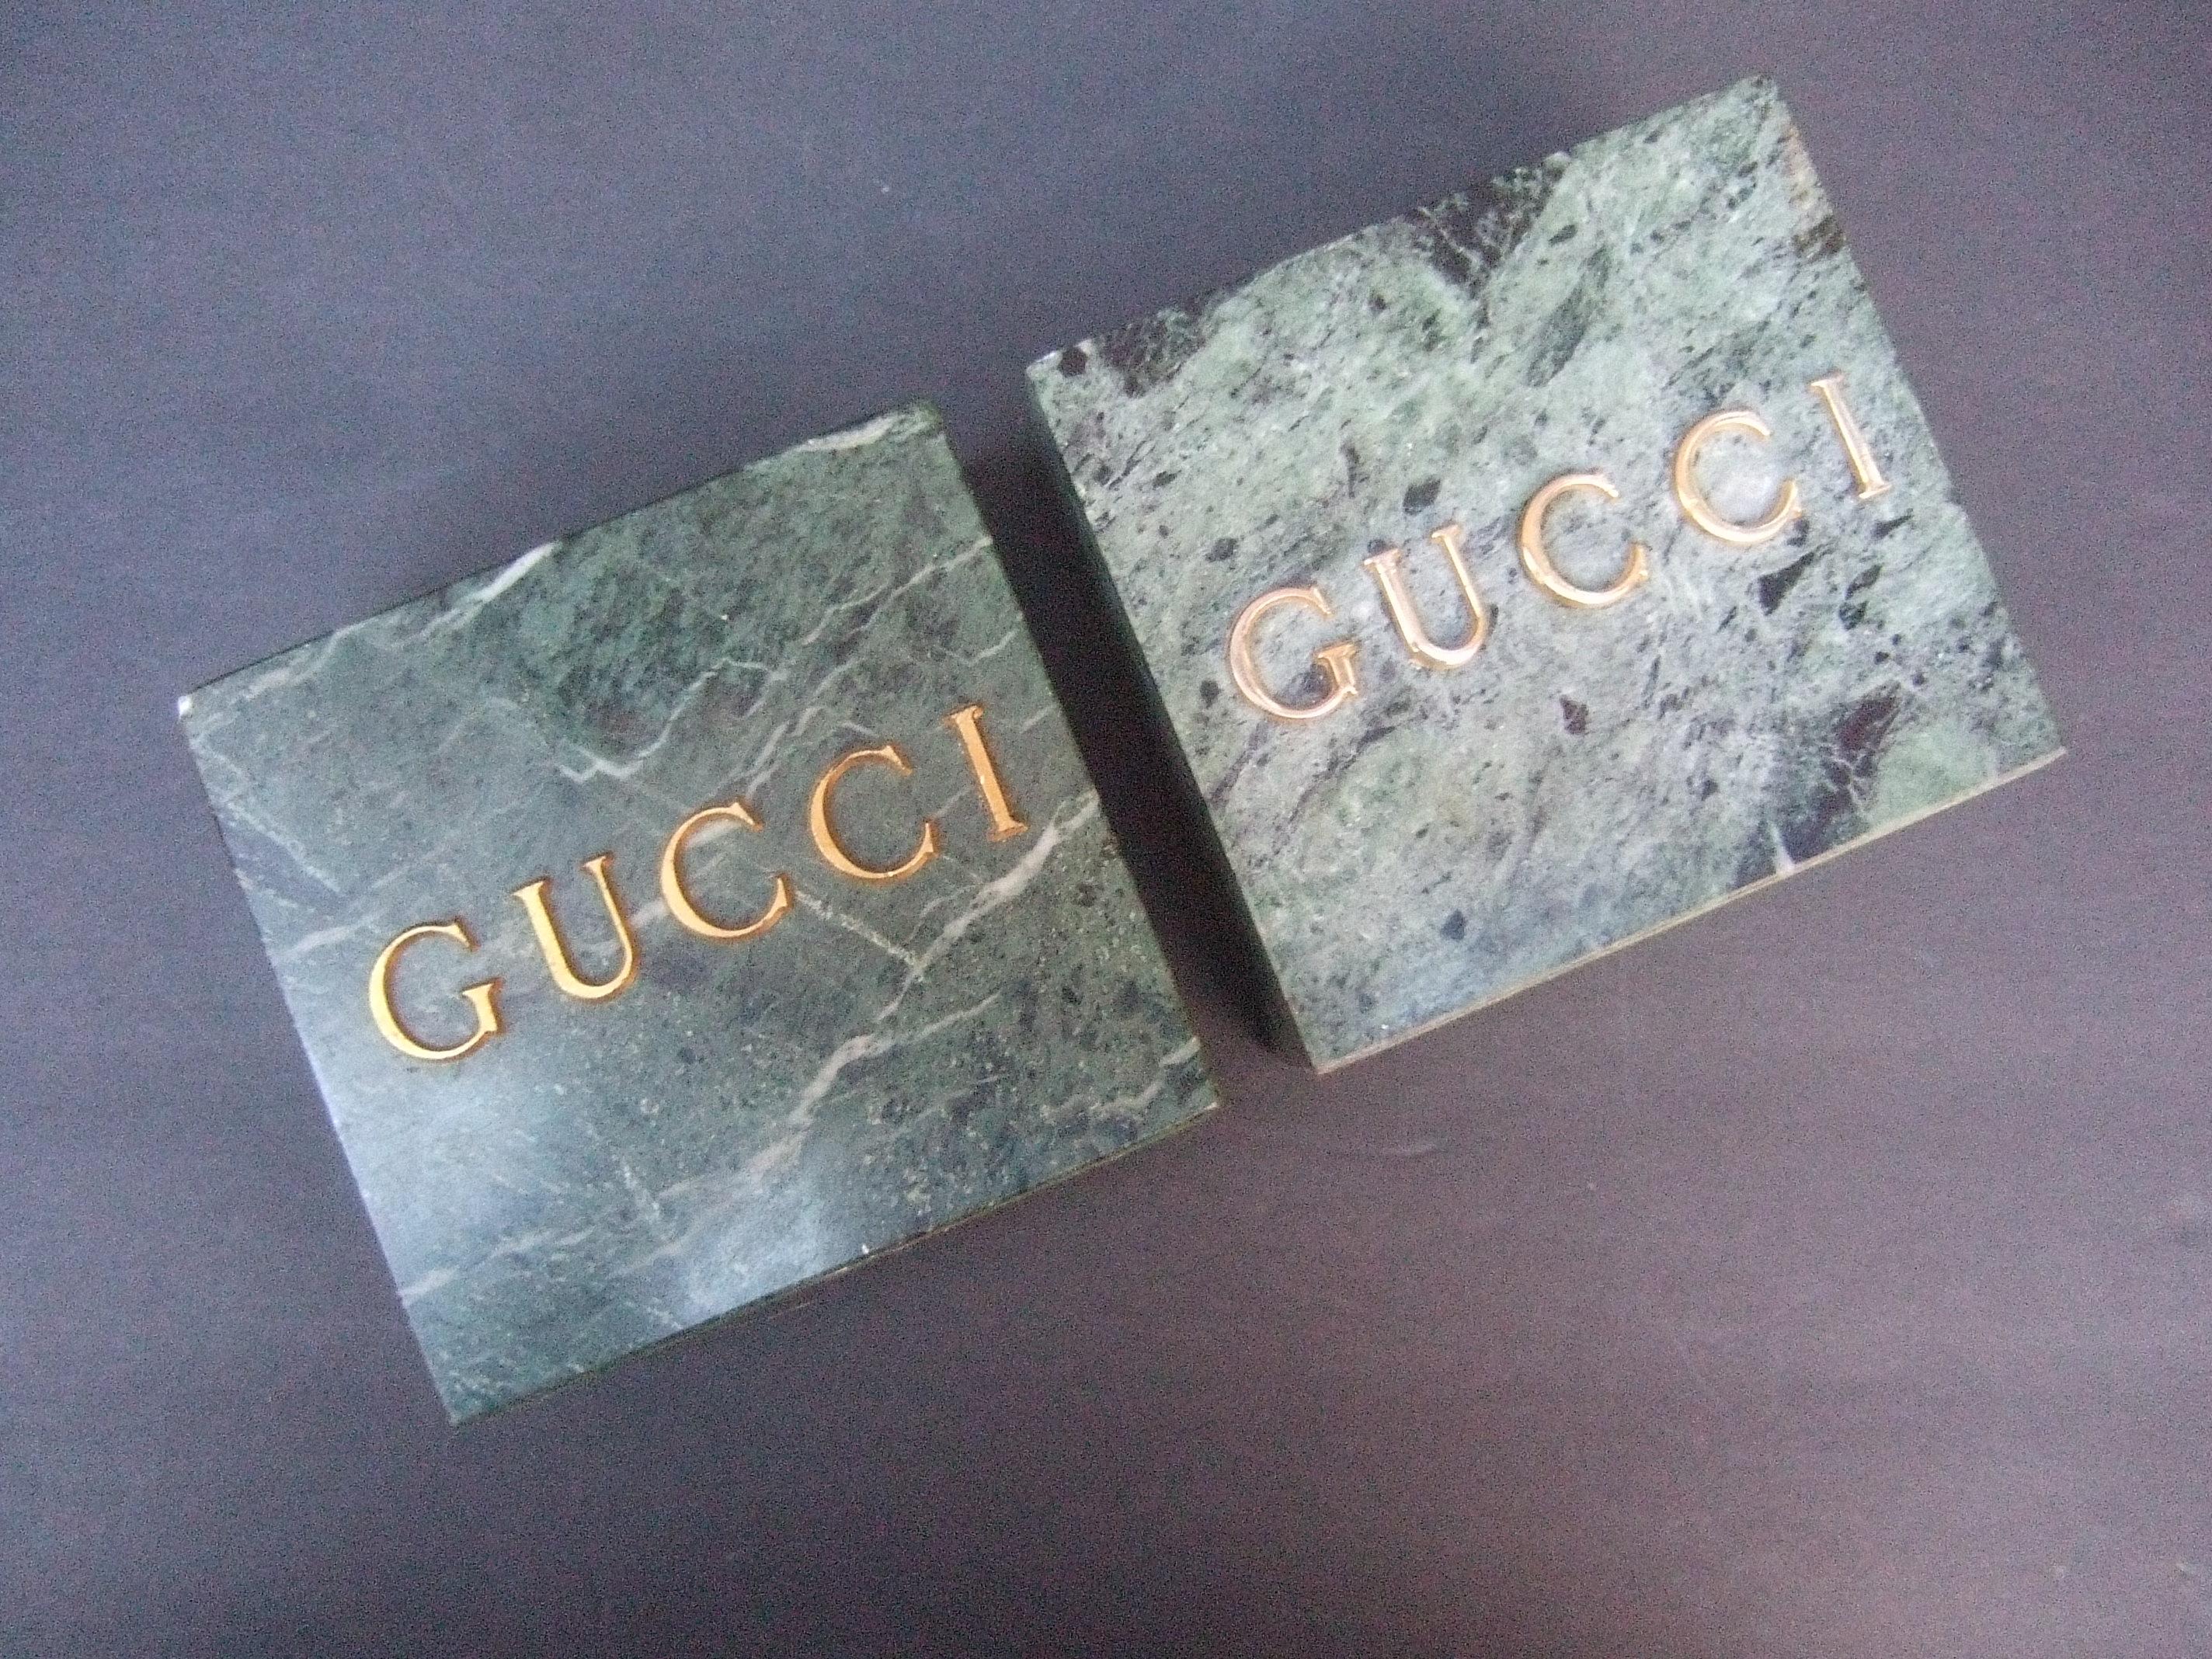 Gucci Pair of Green Marble Stone Bookends / Decorative Objects c 1970s 1